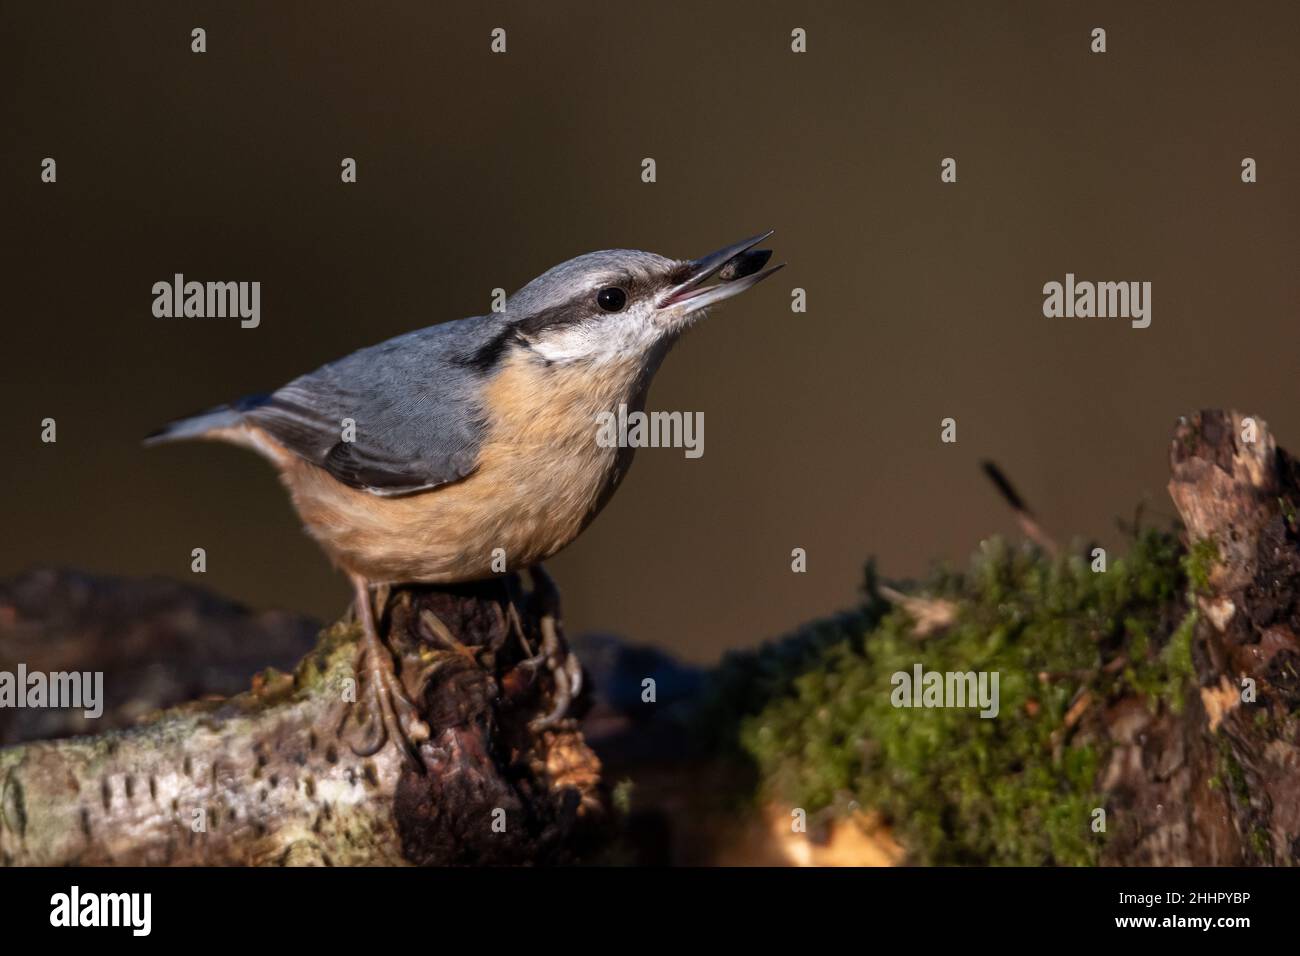 A single adult Eurasian nuthatch in it's natural environment with food in it's mouth and perched on a branch of a tree. Stock Photo